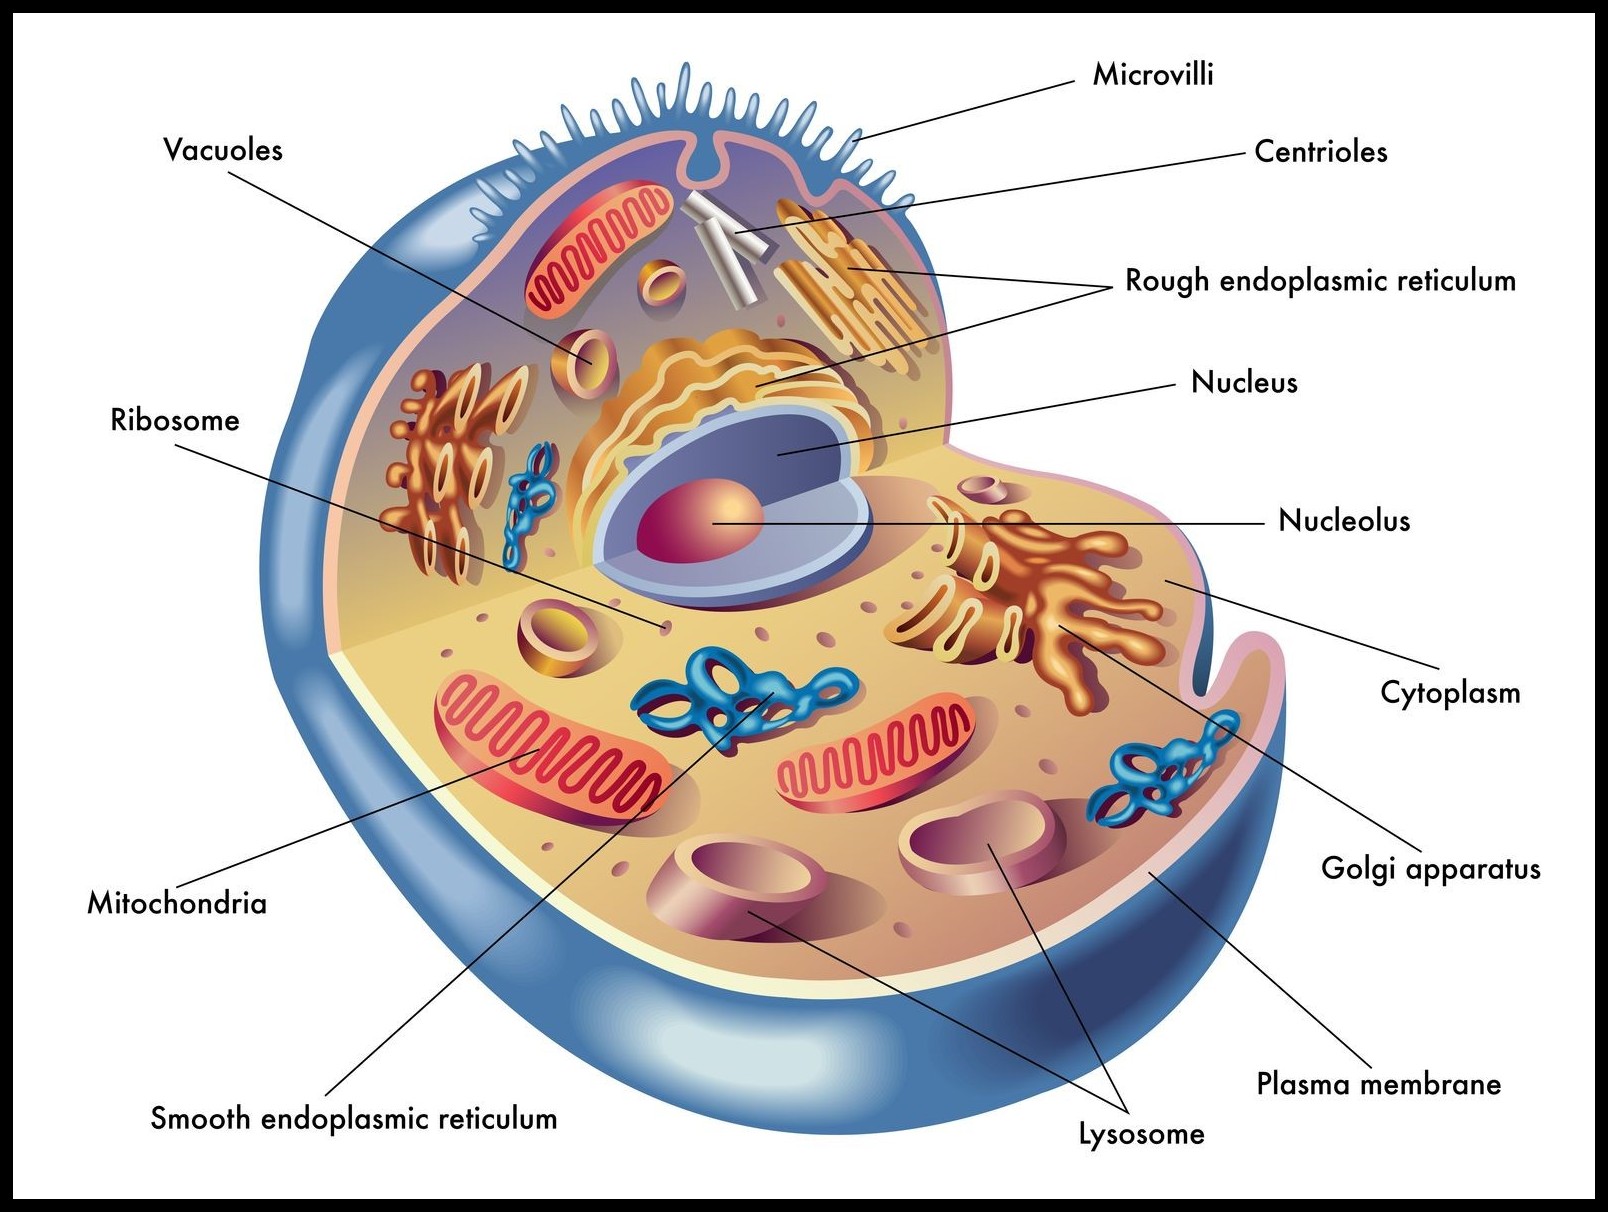 Structure of Cell